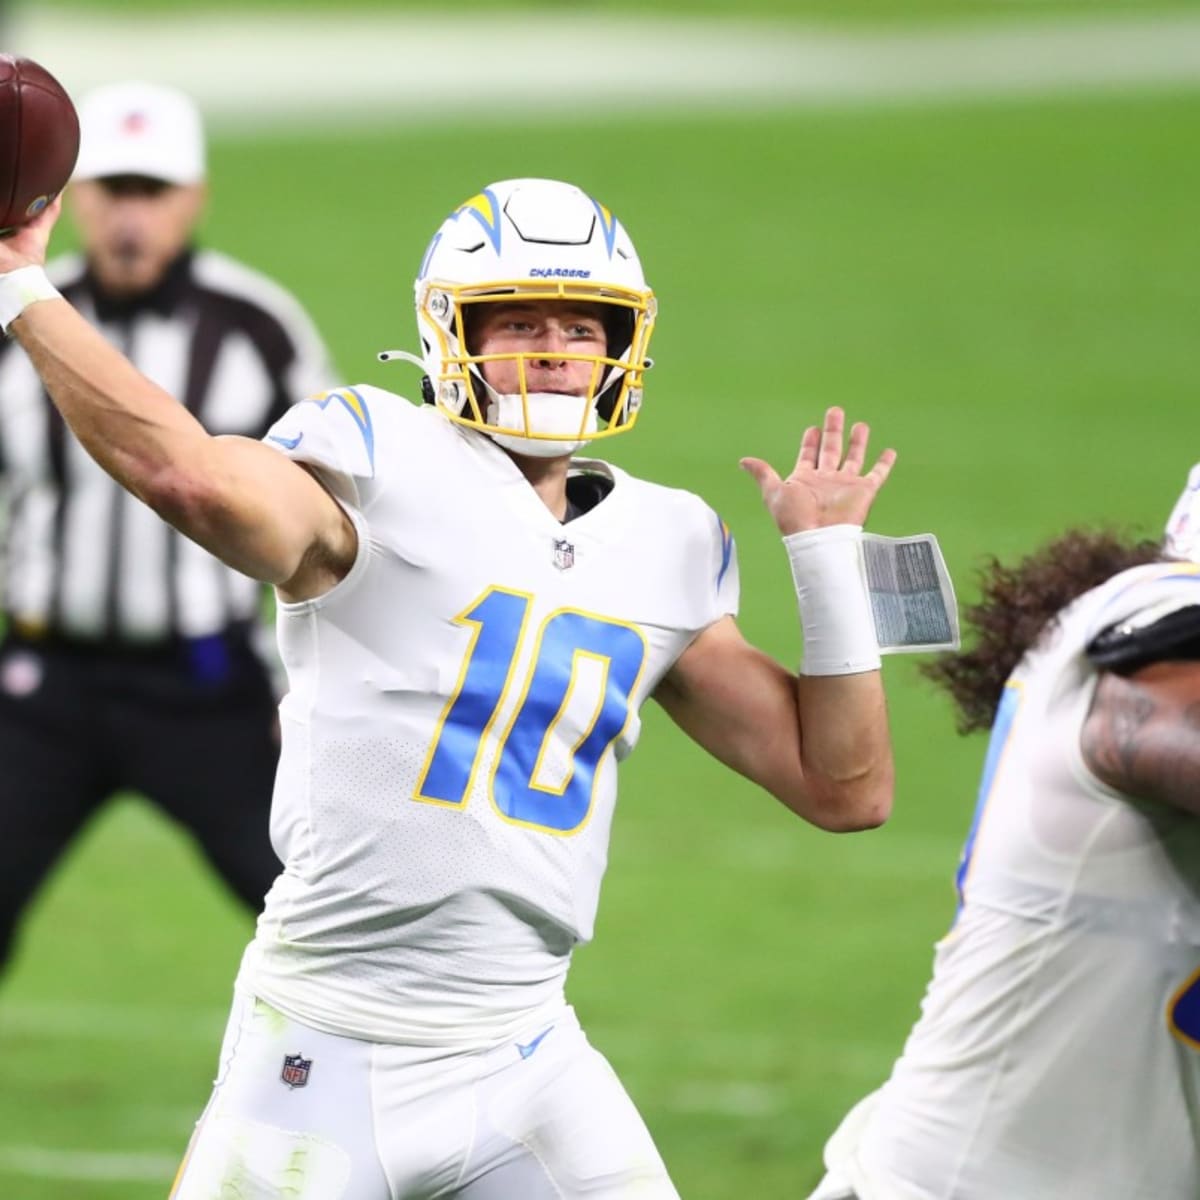 The new Chargers uniforms are here, and they are darn near perfect